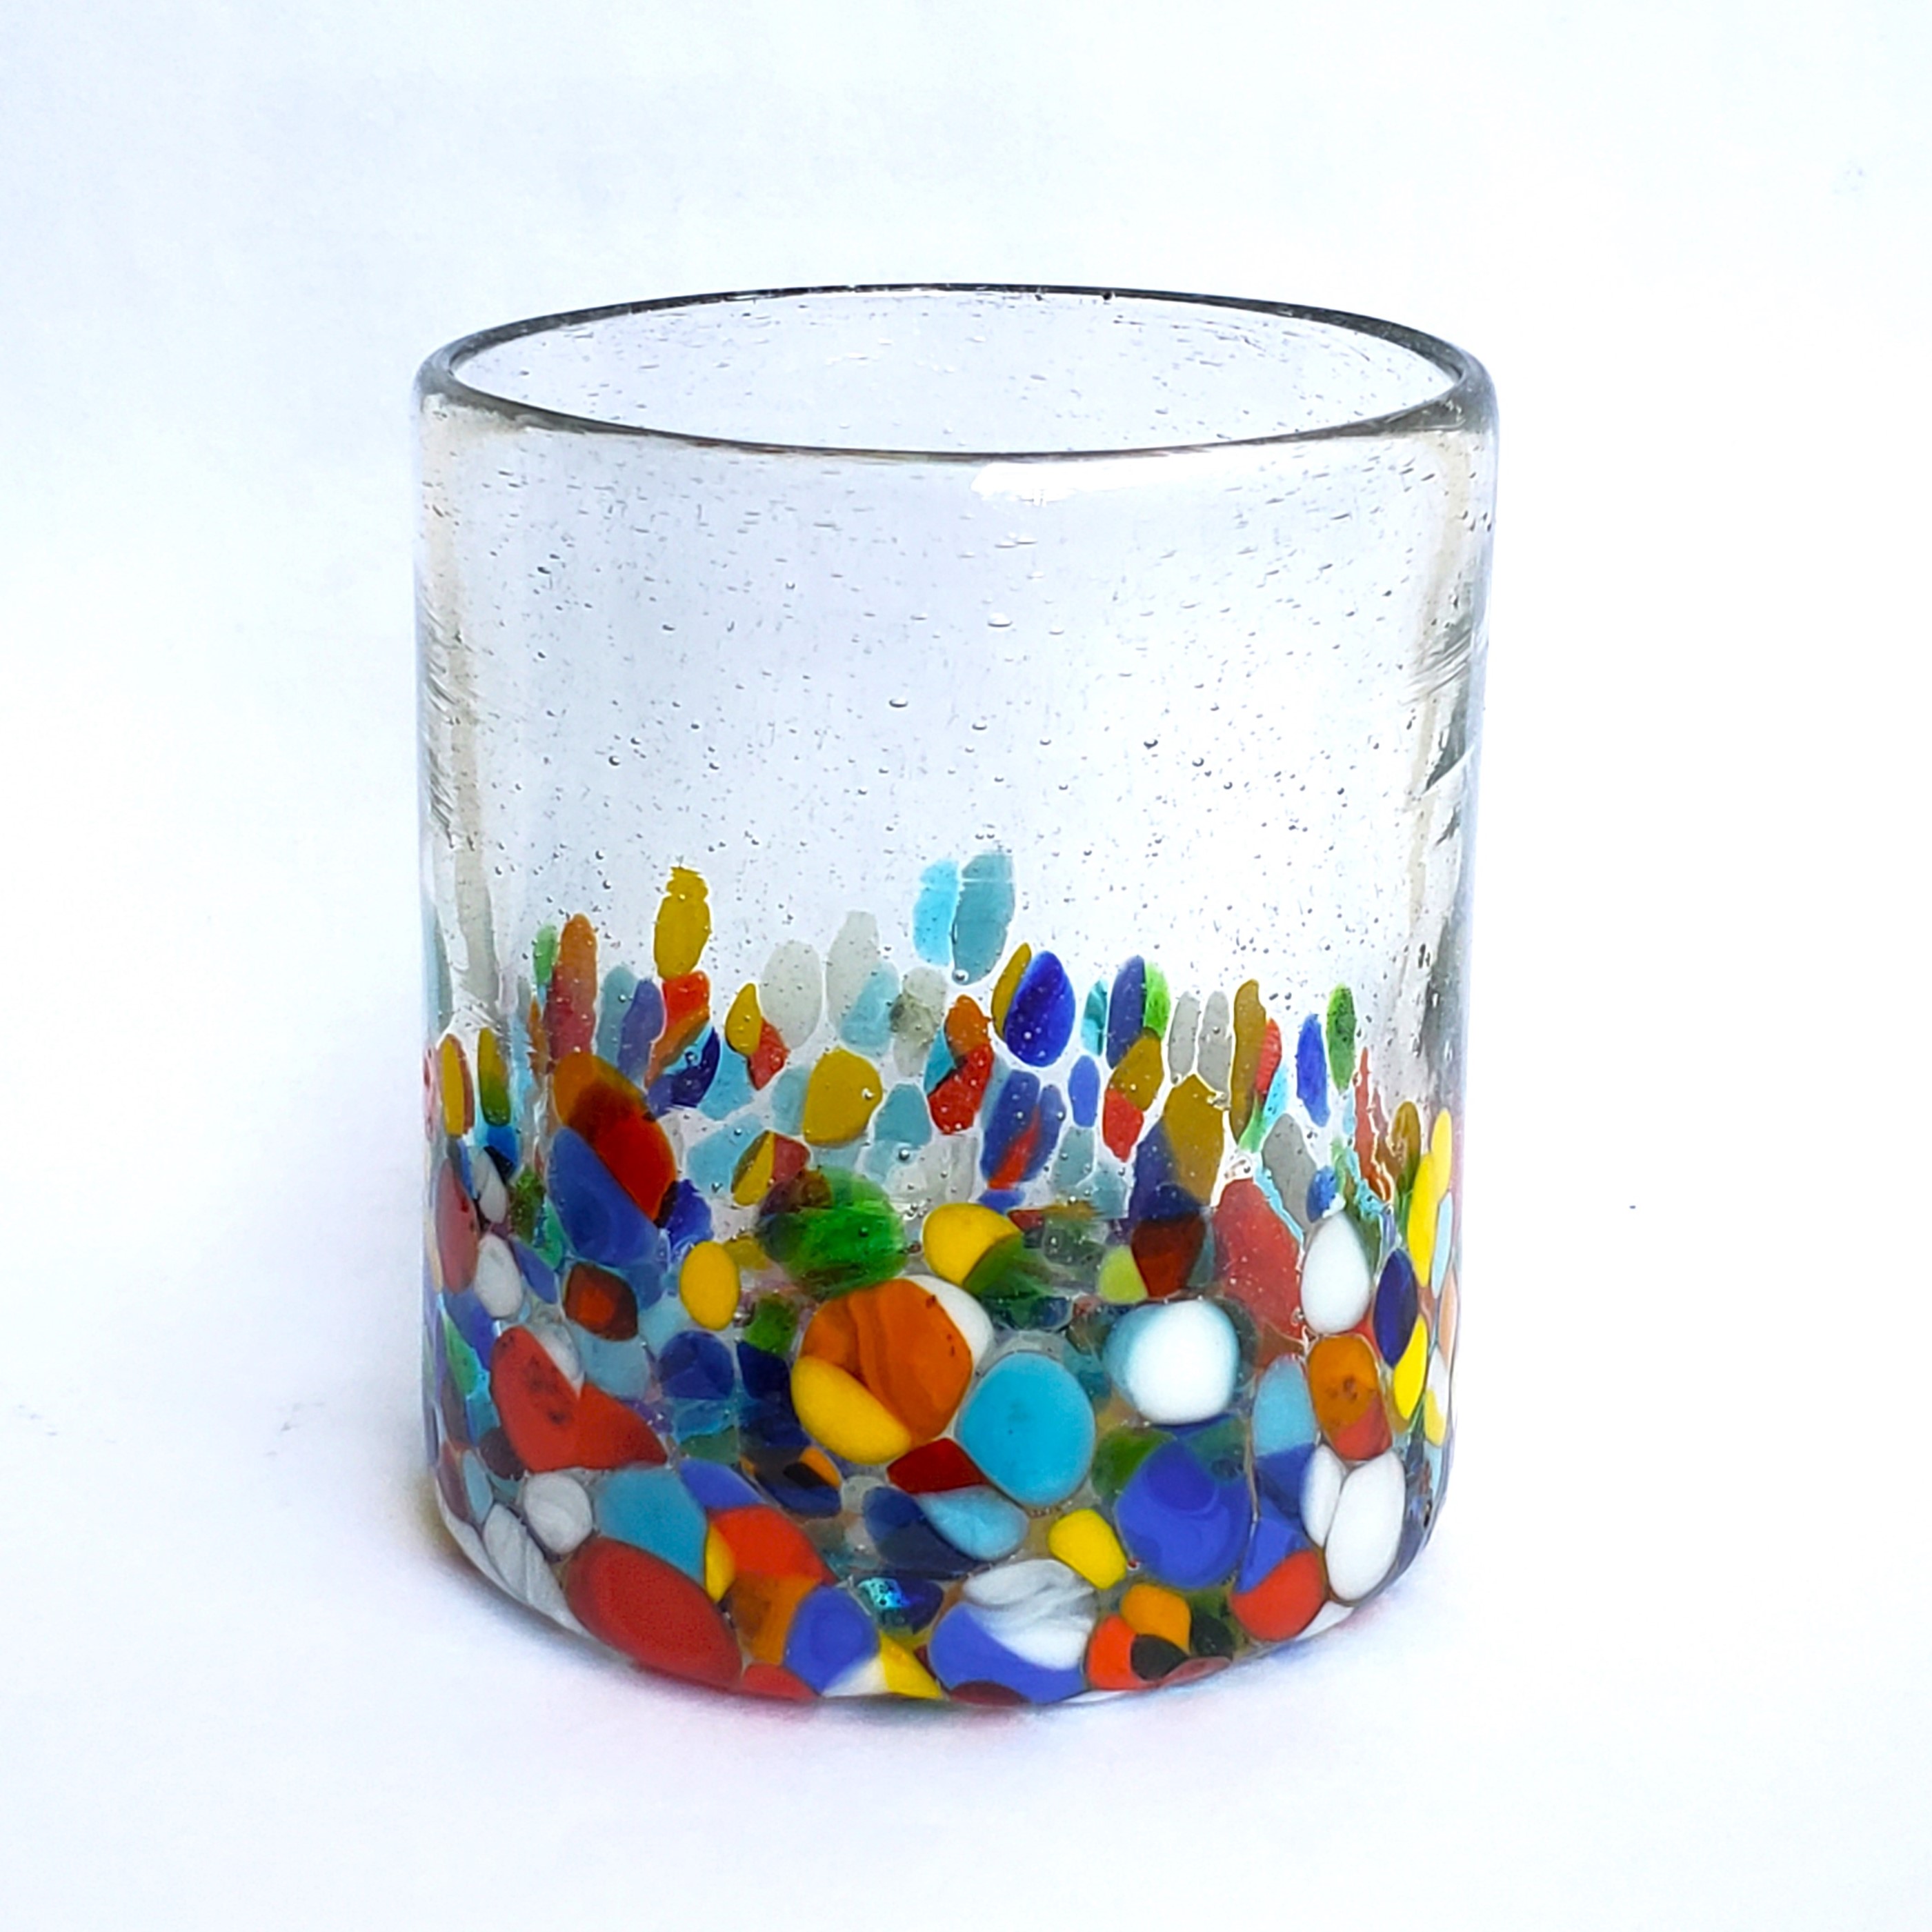 Estilo Confeti al Mayoreo / fetti 9 oz Short Tumblers (set of 6) / Our Clear & Confetti Glassware combines the best of two worlds: clear, thick, sturdy handcrafted glass on top, meets the colorful, festive, confetti bottom! These glasses will sure be a standout in any table setting or as a fabulous gift for your loved ones. Crafted one by one by skilled artisans in Tonala, Mexico, each glass is different from the next making them unique works of art. You'll be amazed at how they make having a simple glass of water a happier experience. Made from eco-friendly recycled glass.